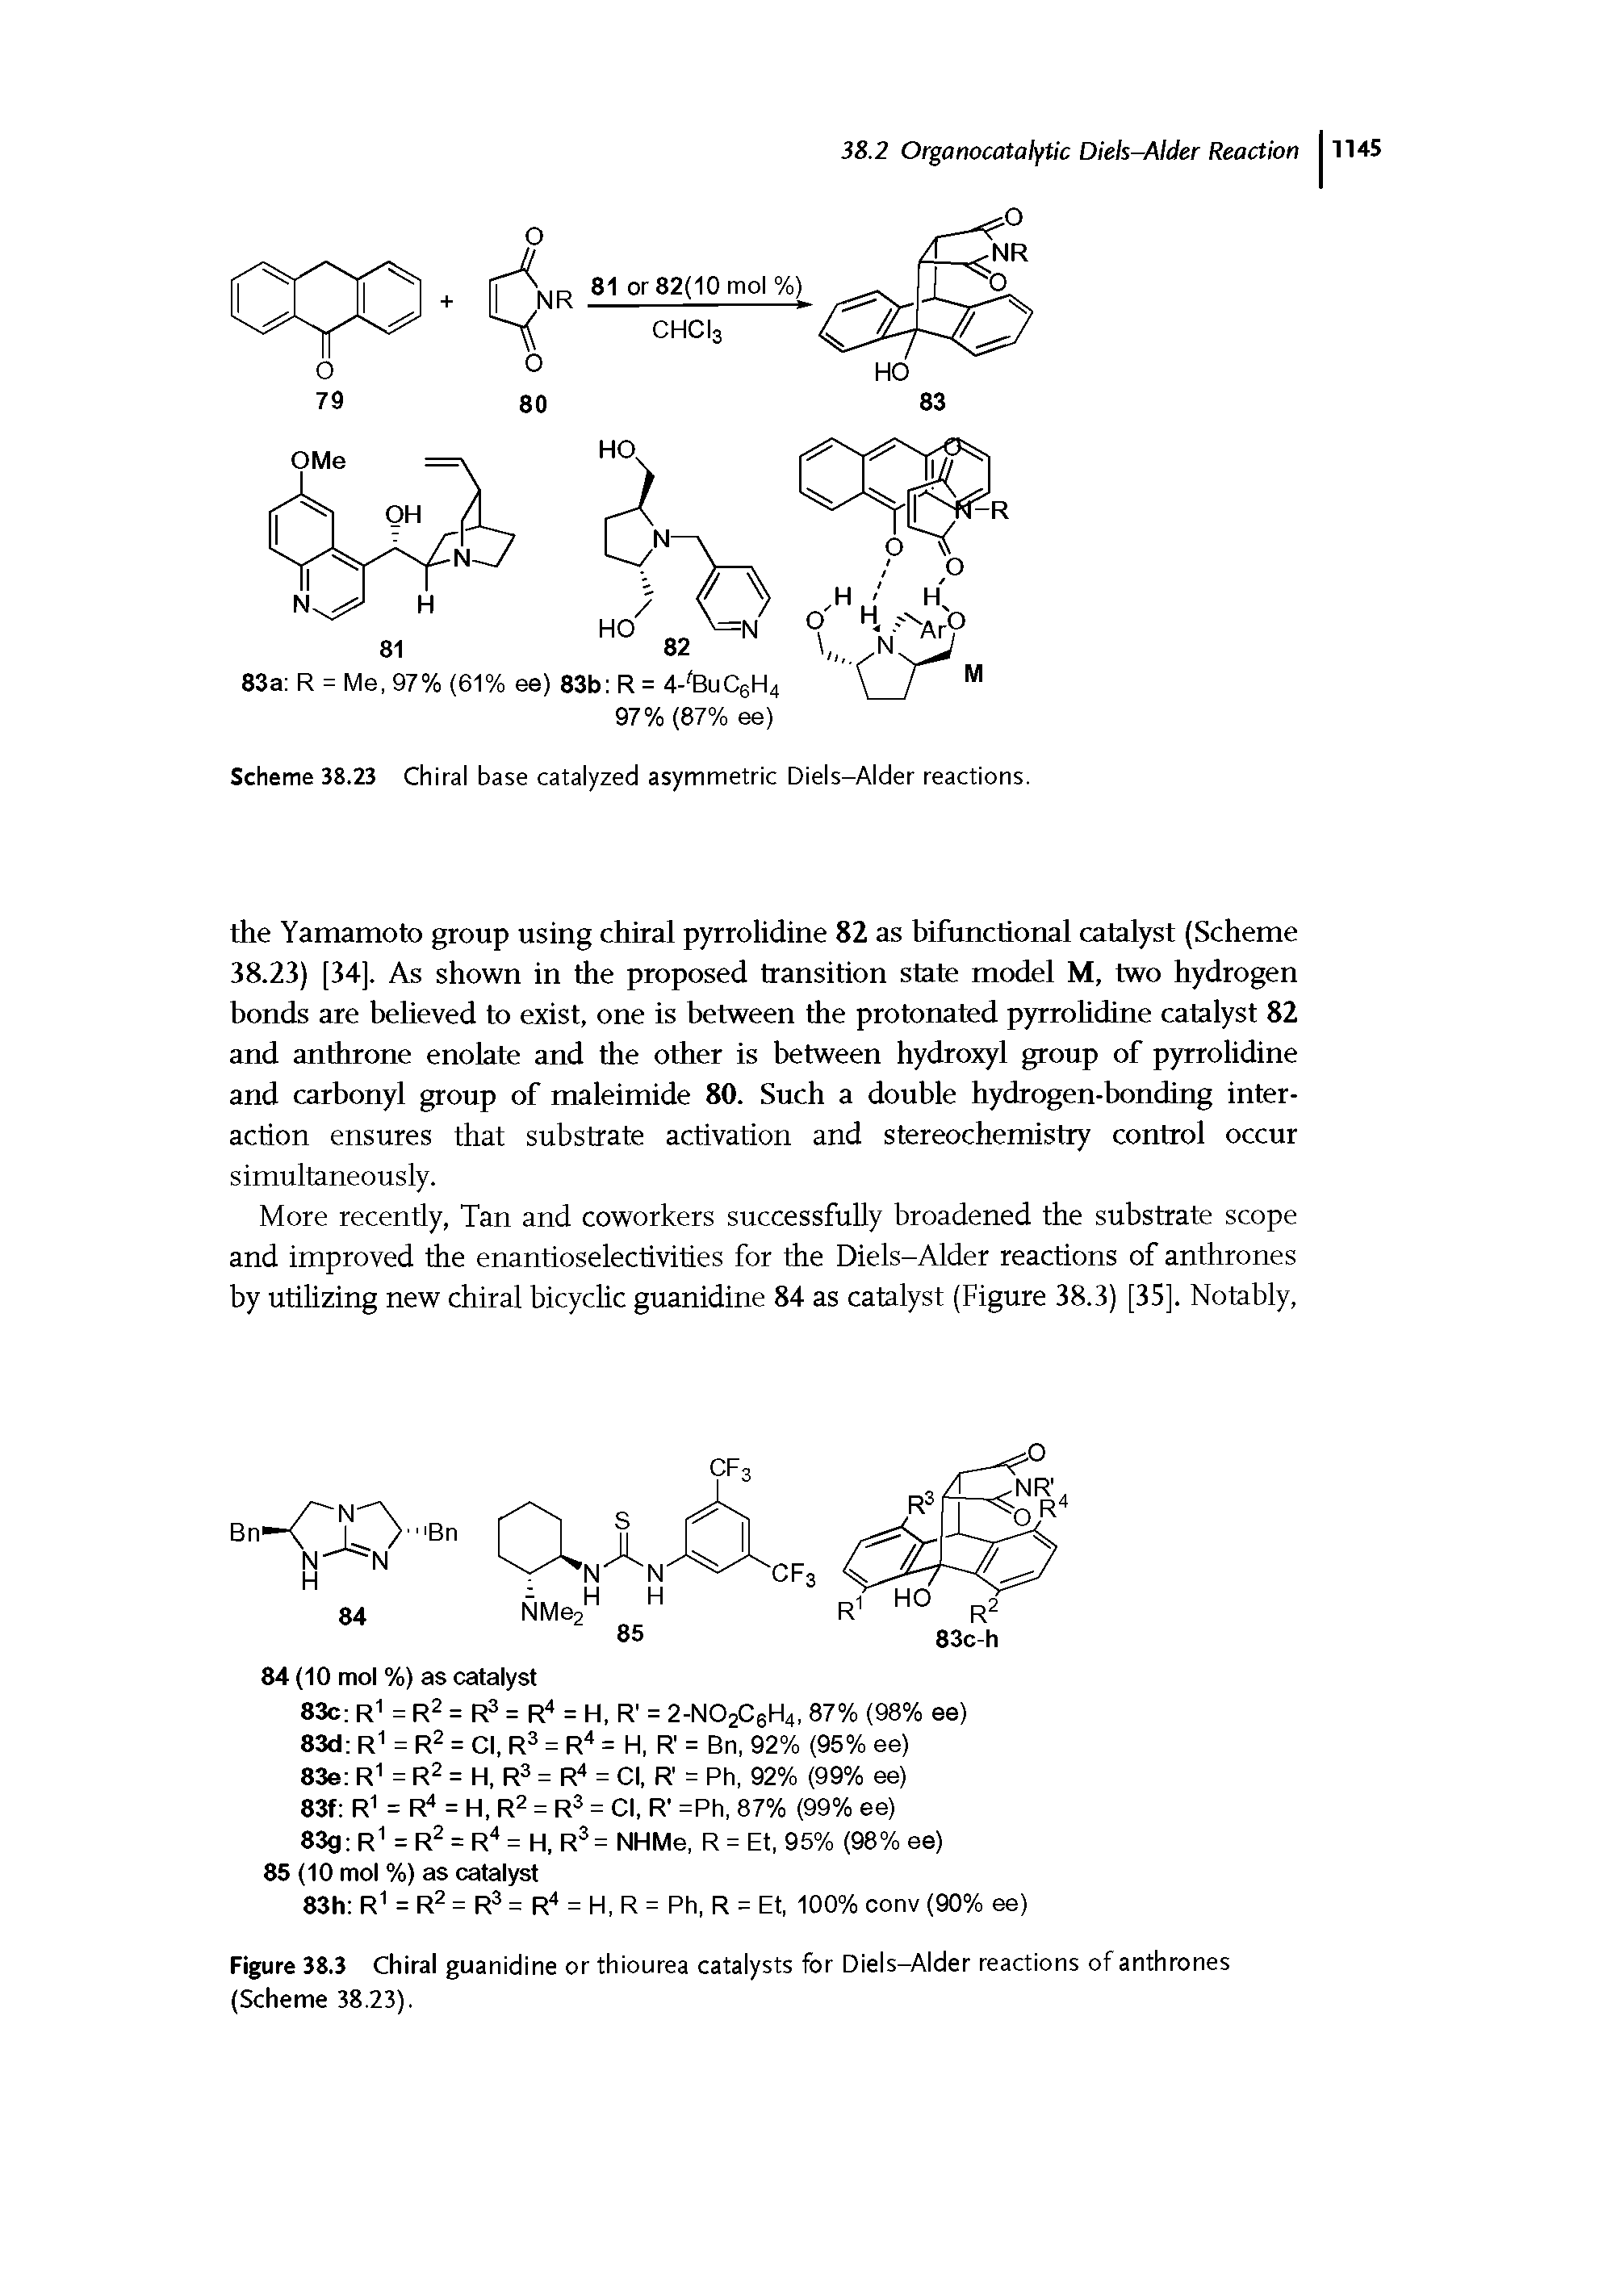 Figure 38.3 Chiral guanidine or thiourea catalysts for Diels-Alder reactions of anthrones (Scheme 38.23).